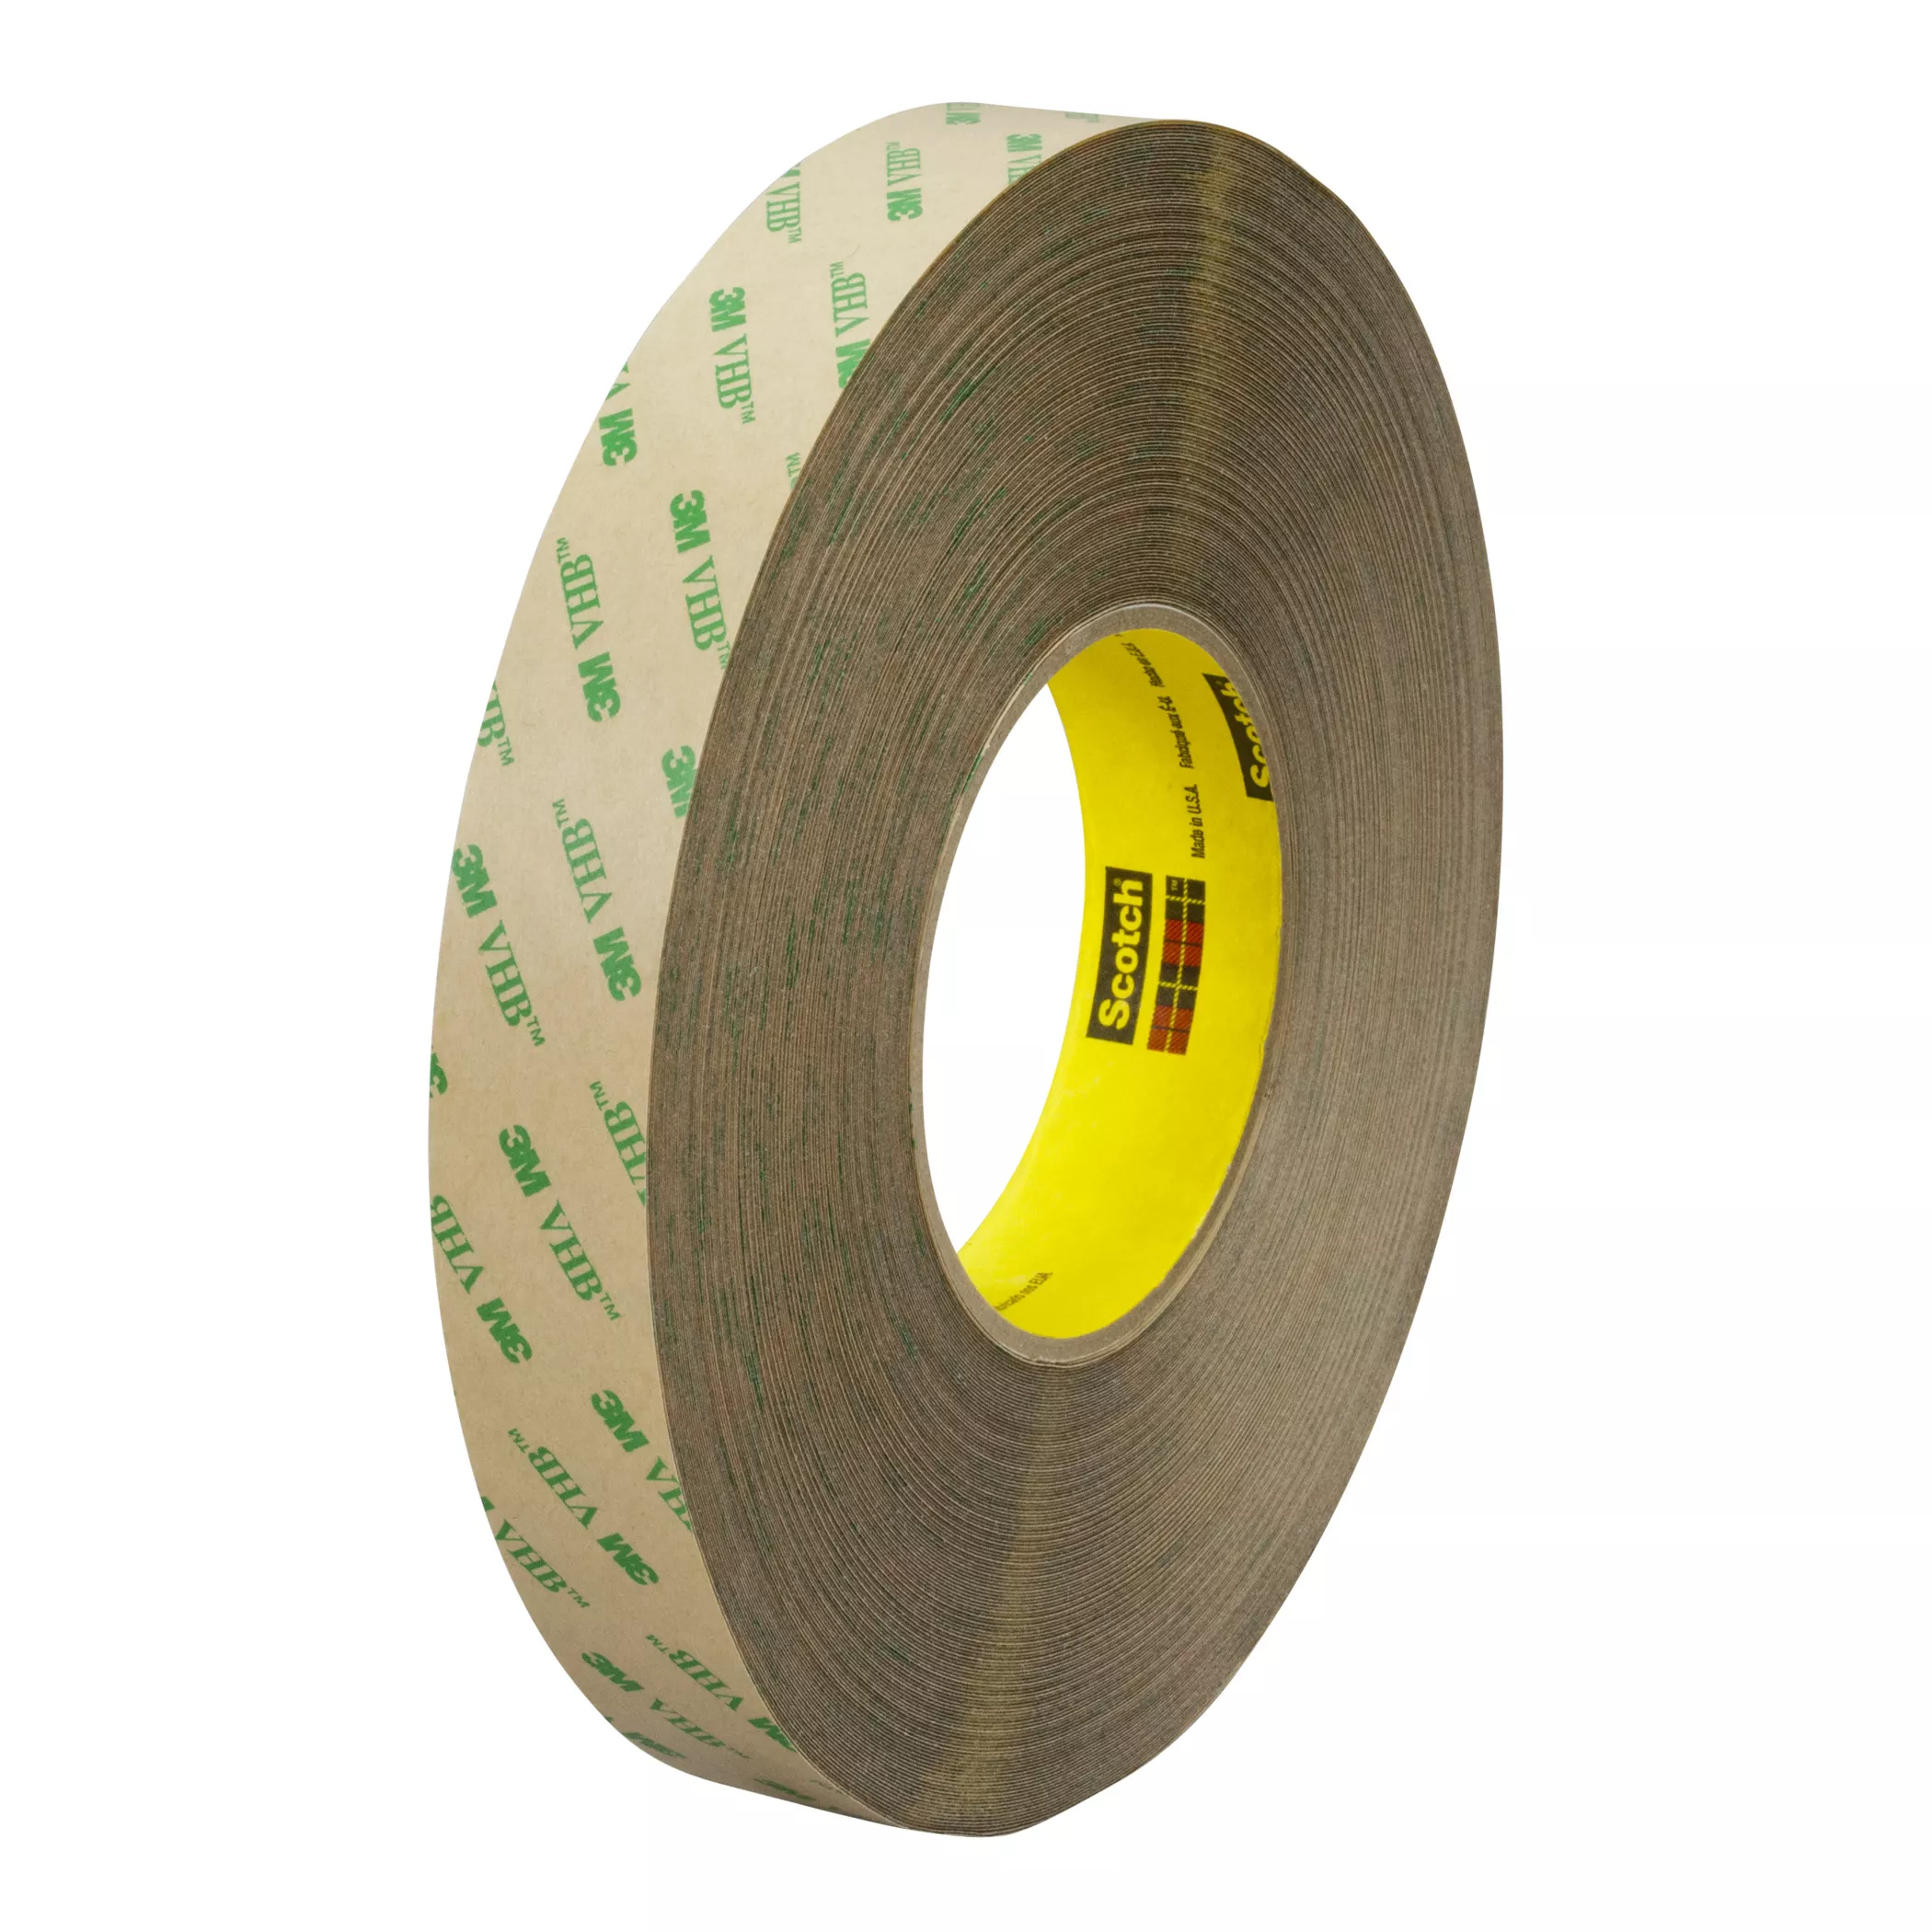 3M™ Adhesive Transfer Tape 9473PC, Clear, 2 in x 60 yd, 10 mil, 6
Roll/Case